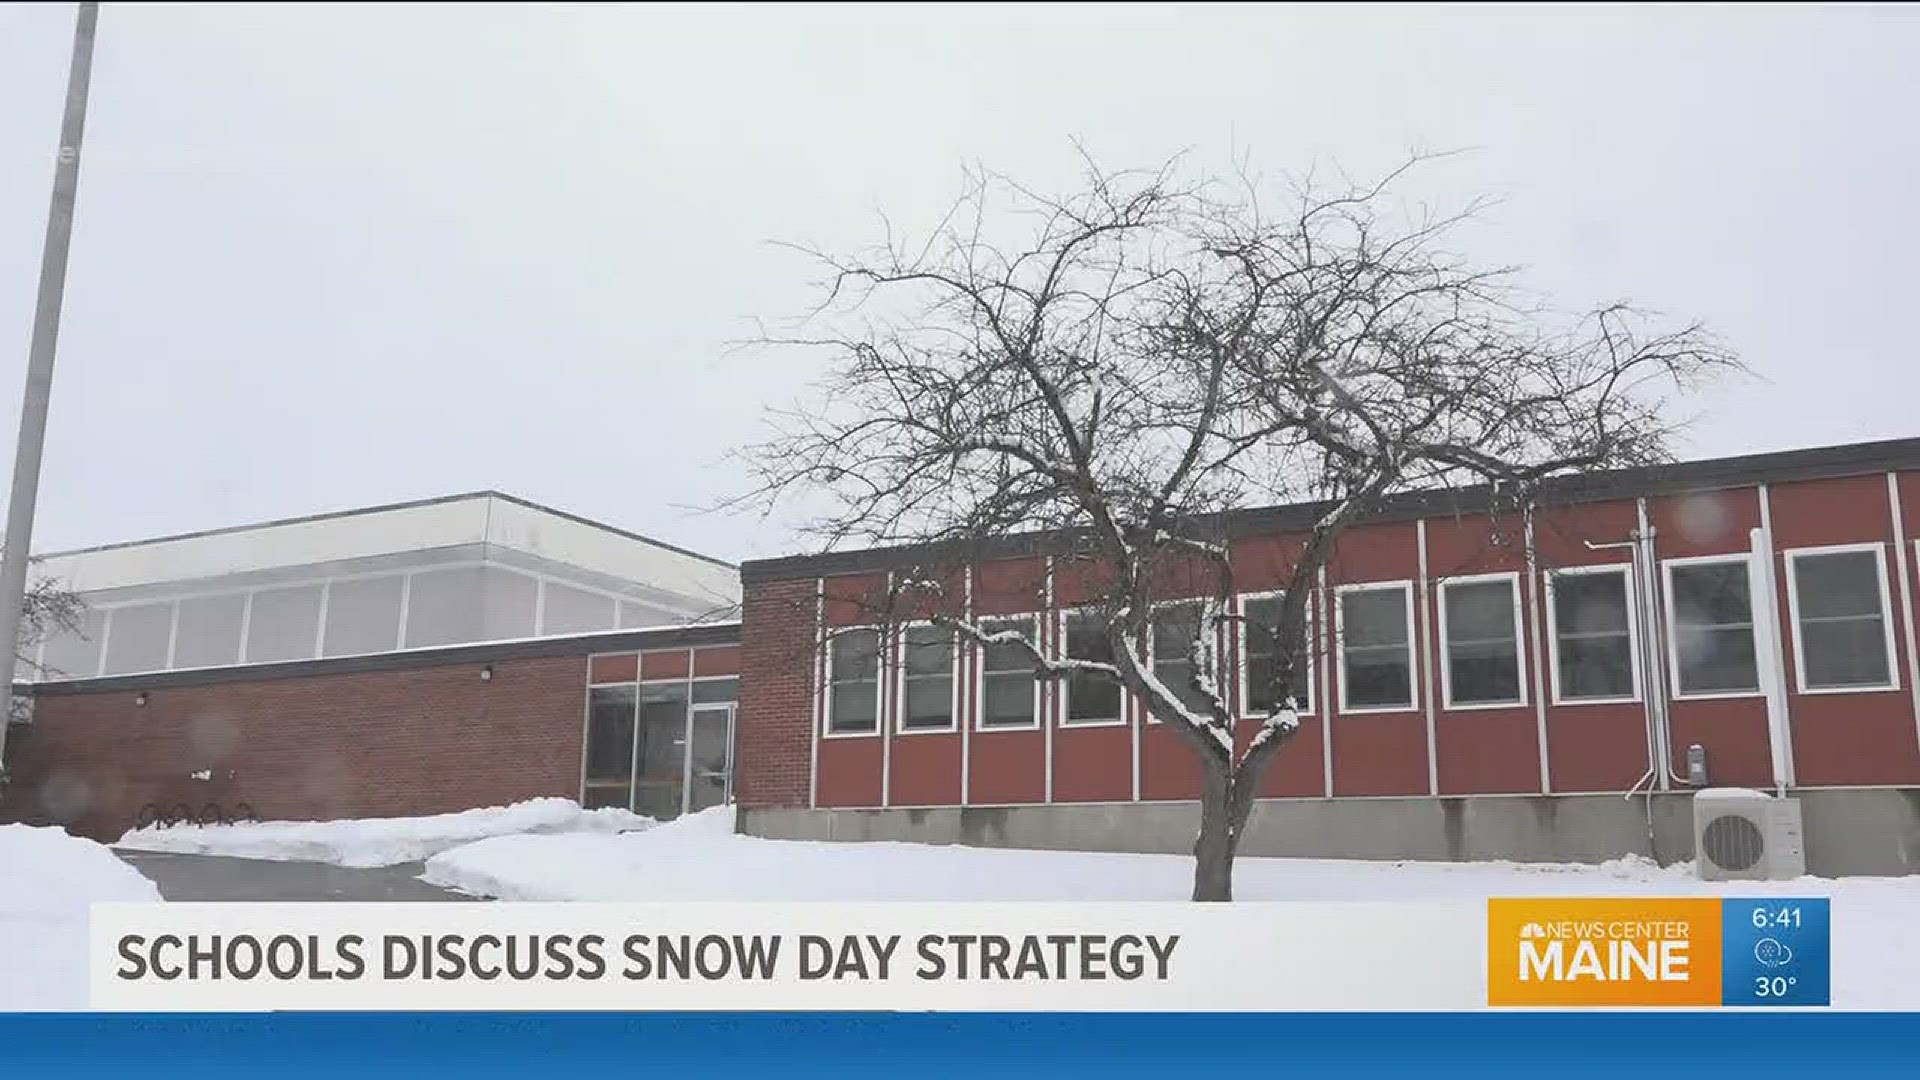 Snow days extend school year for Maine students